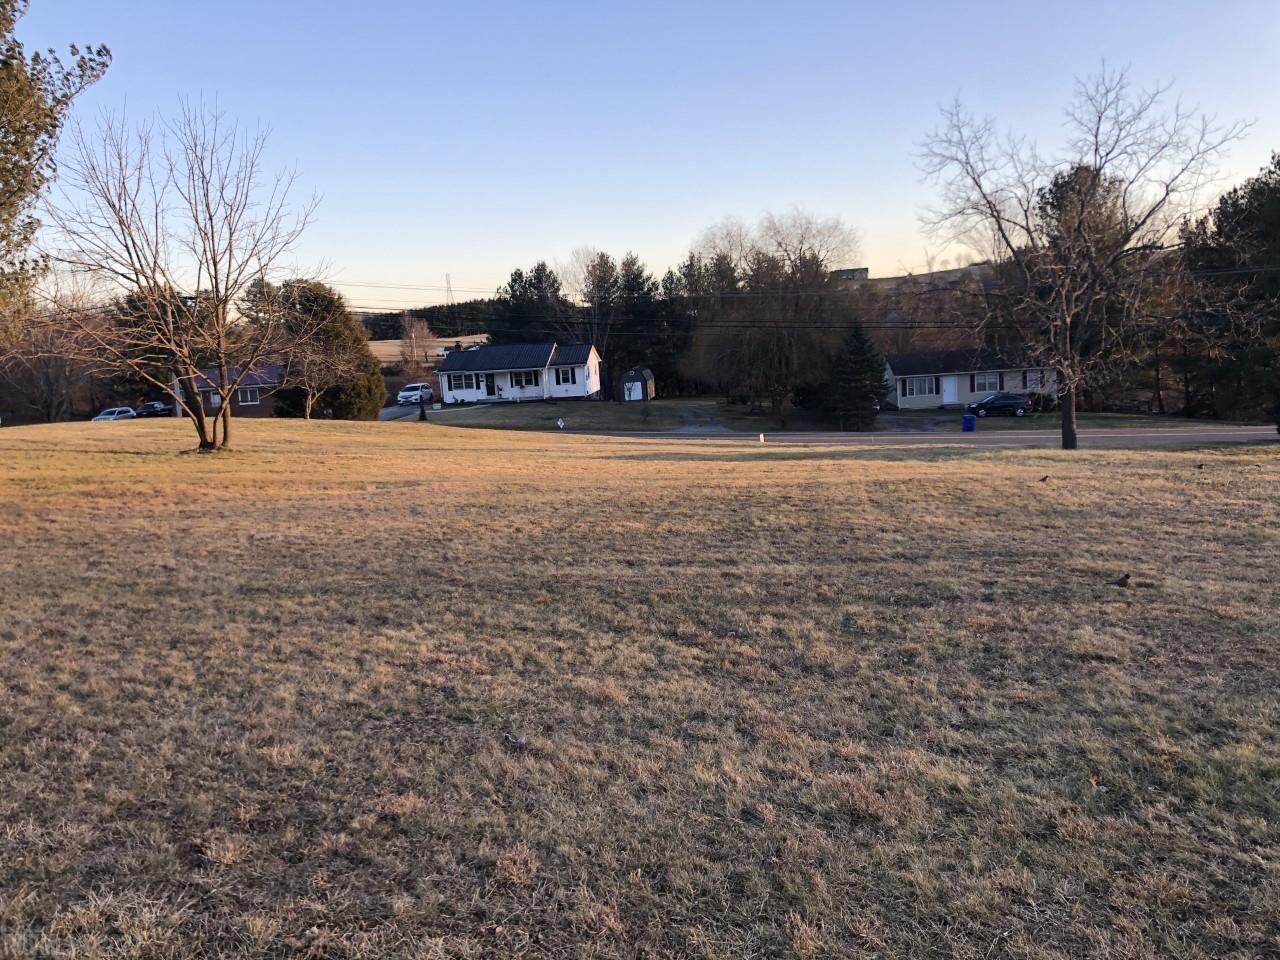 Can't find a home to purchase?  Consider building!  This almost half acre lot is level and ready for your new home!  Very convenient location with easy access to I-81 and a quick drive to downtown, shopping and restaurants.  Soil study was completed in 2018 for a 3BD conventional septic system.  Public water is available.